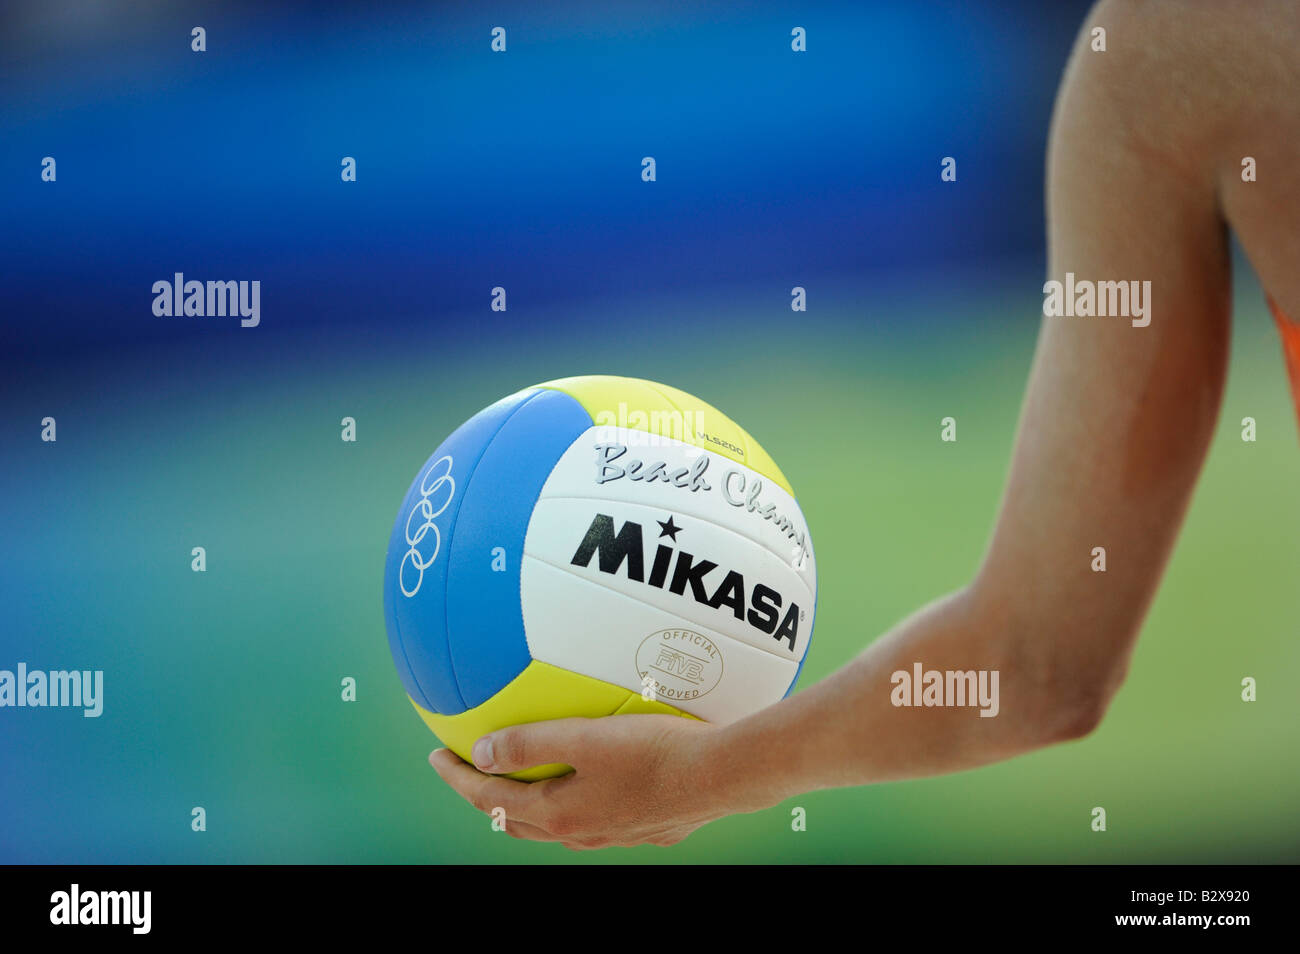 Female beach volley player ready to serve a Mikasa ball during the Beijing 2008 Olympic Games, China Stock Photo